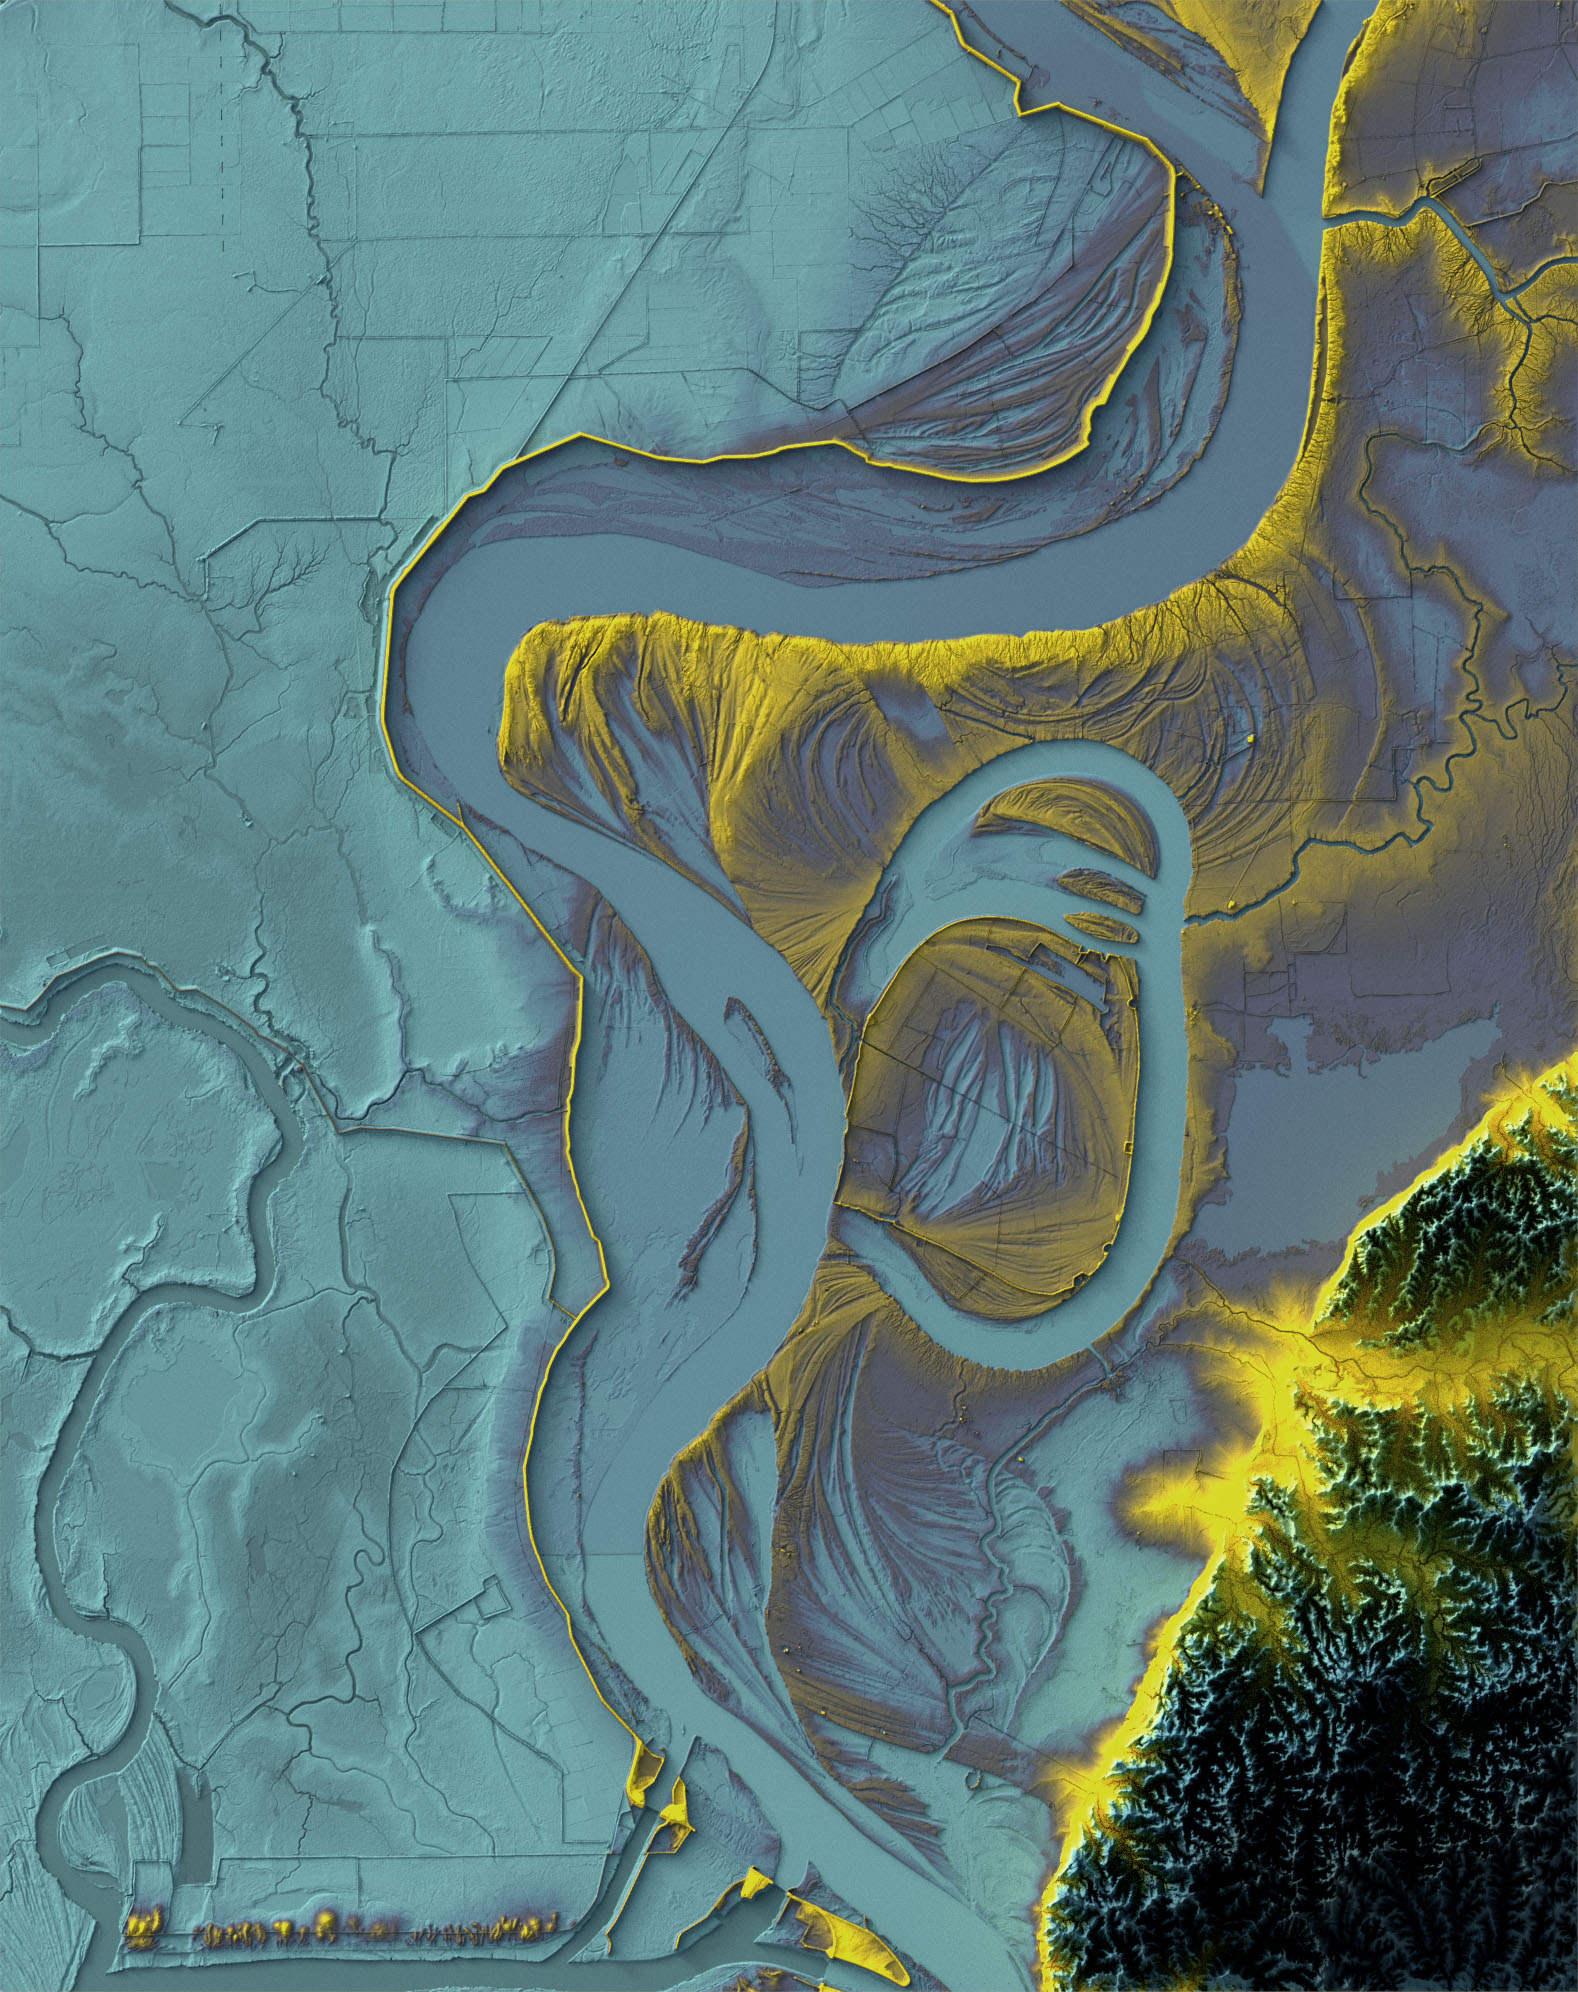 Lidar image of Loch Leven and the Lower Mississippi River basin with blue and yellow color tones.